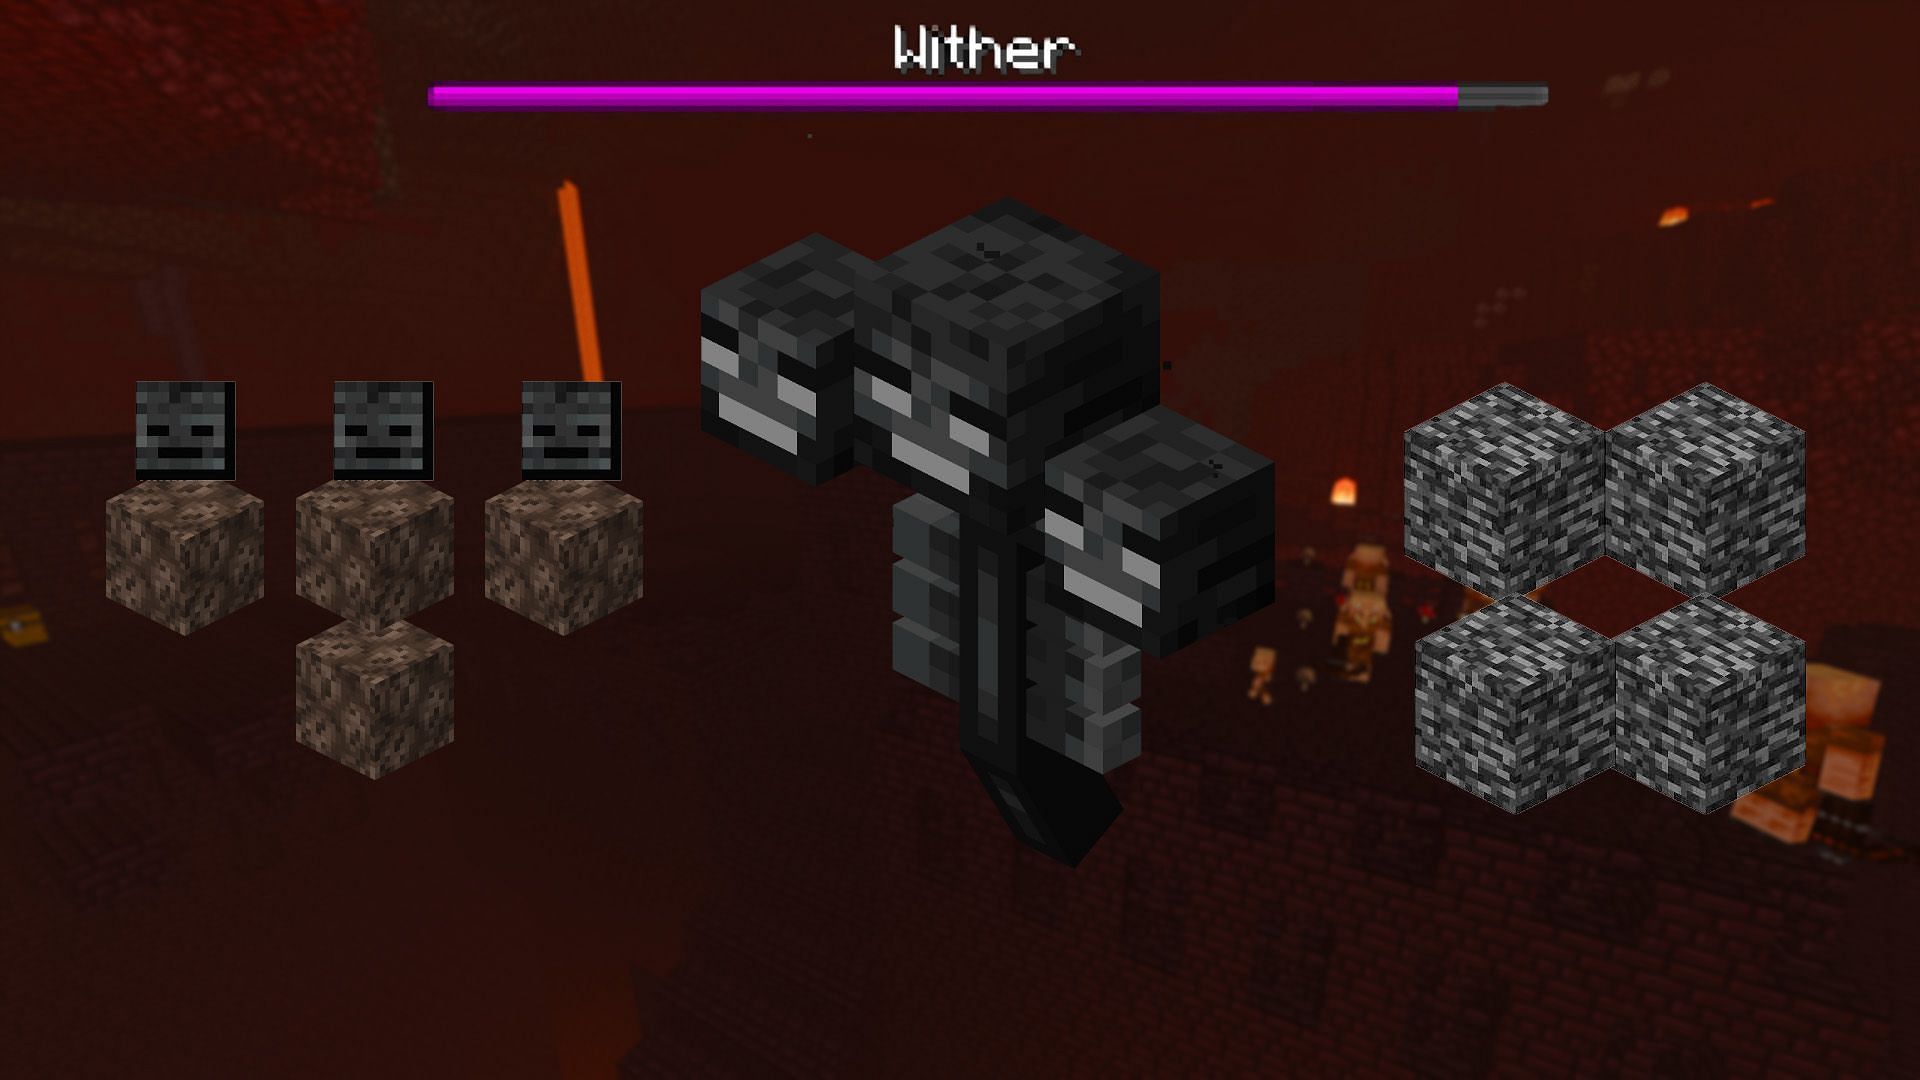 Minecraft Wither boss fight guide How to summon, best strategies, and more